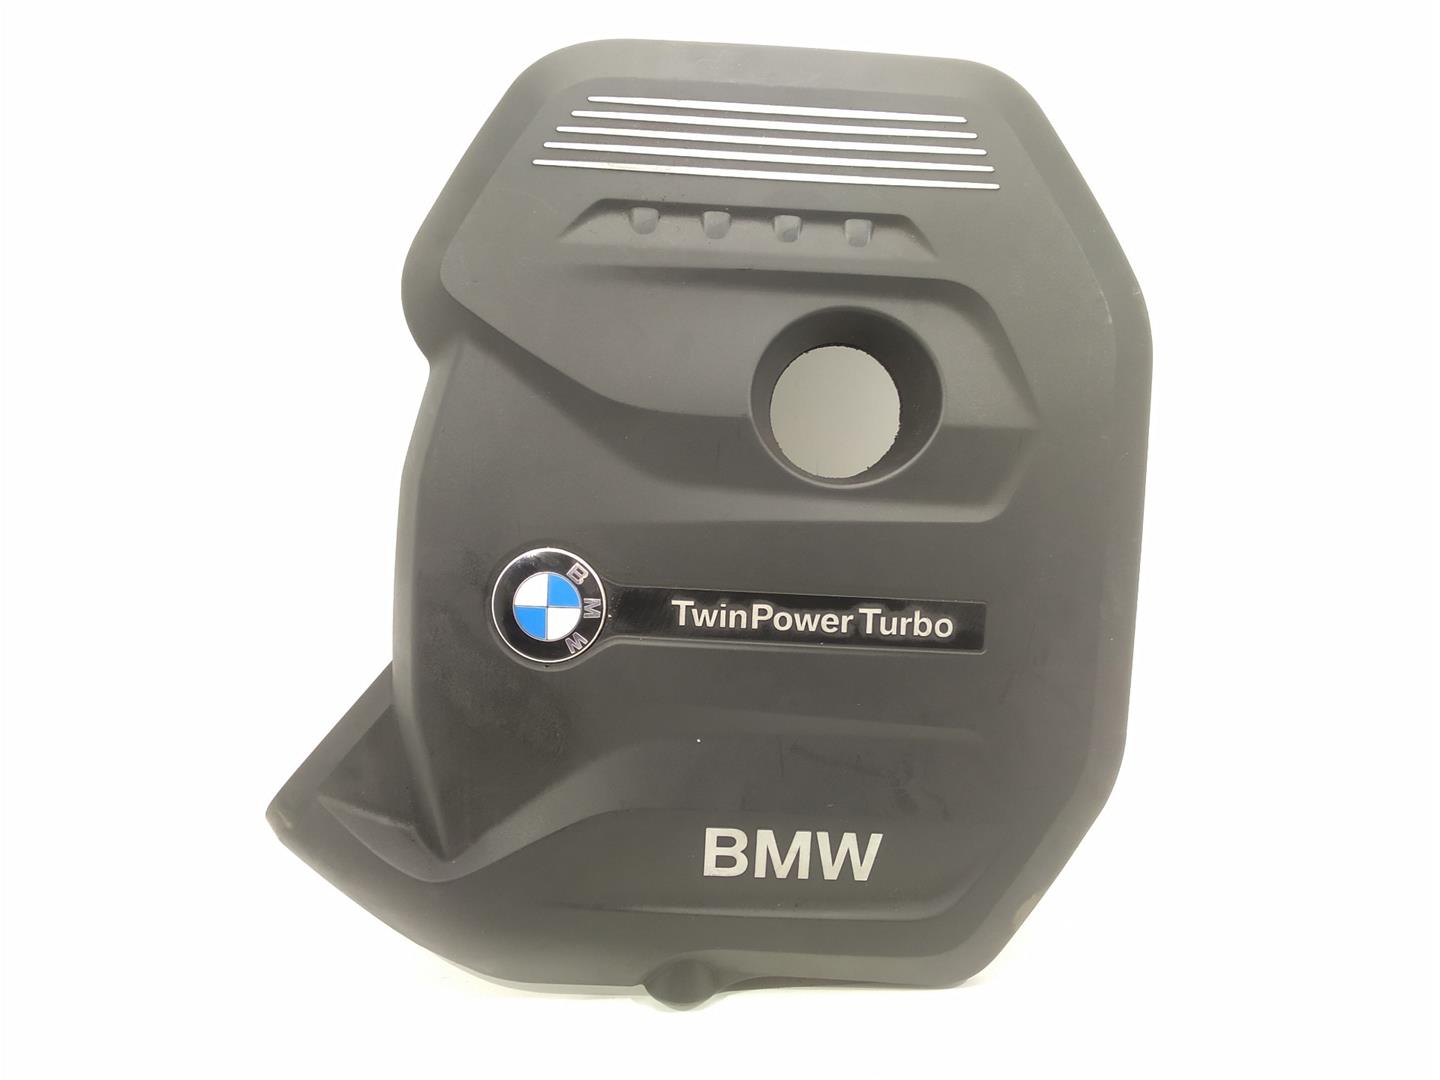 BMW 2 Series F22/F23 (2013-2020) Engine Cover 8621822, 8621822, 8621822 24514016